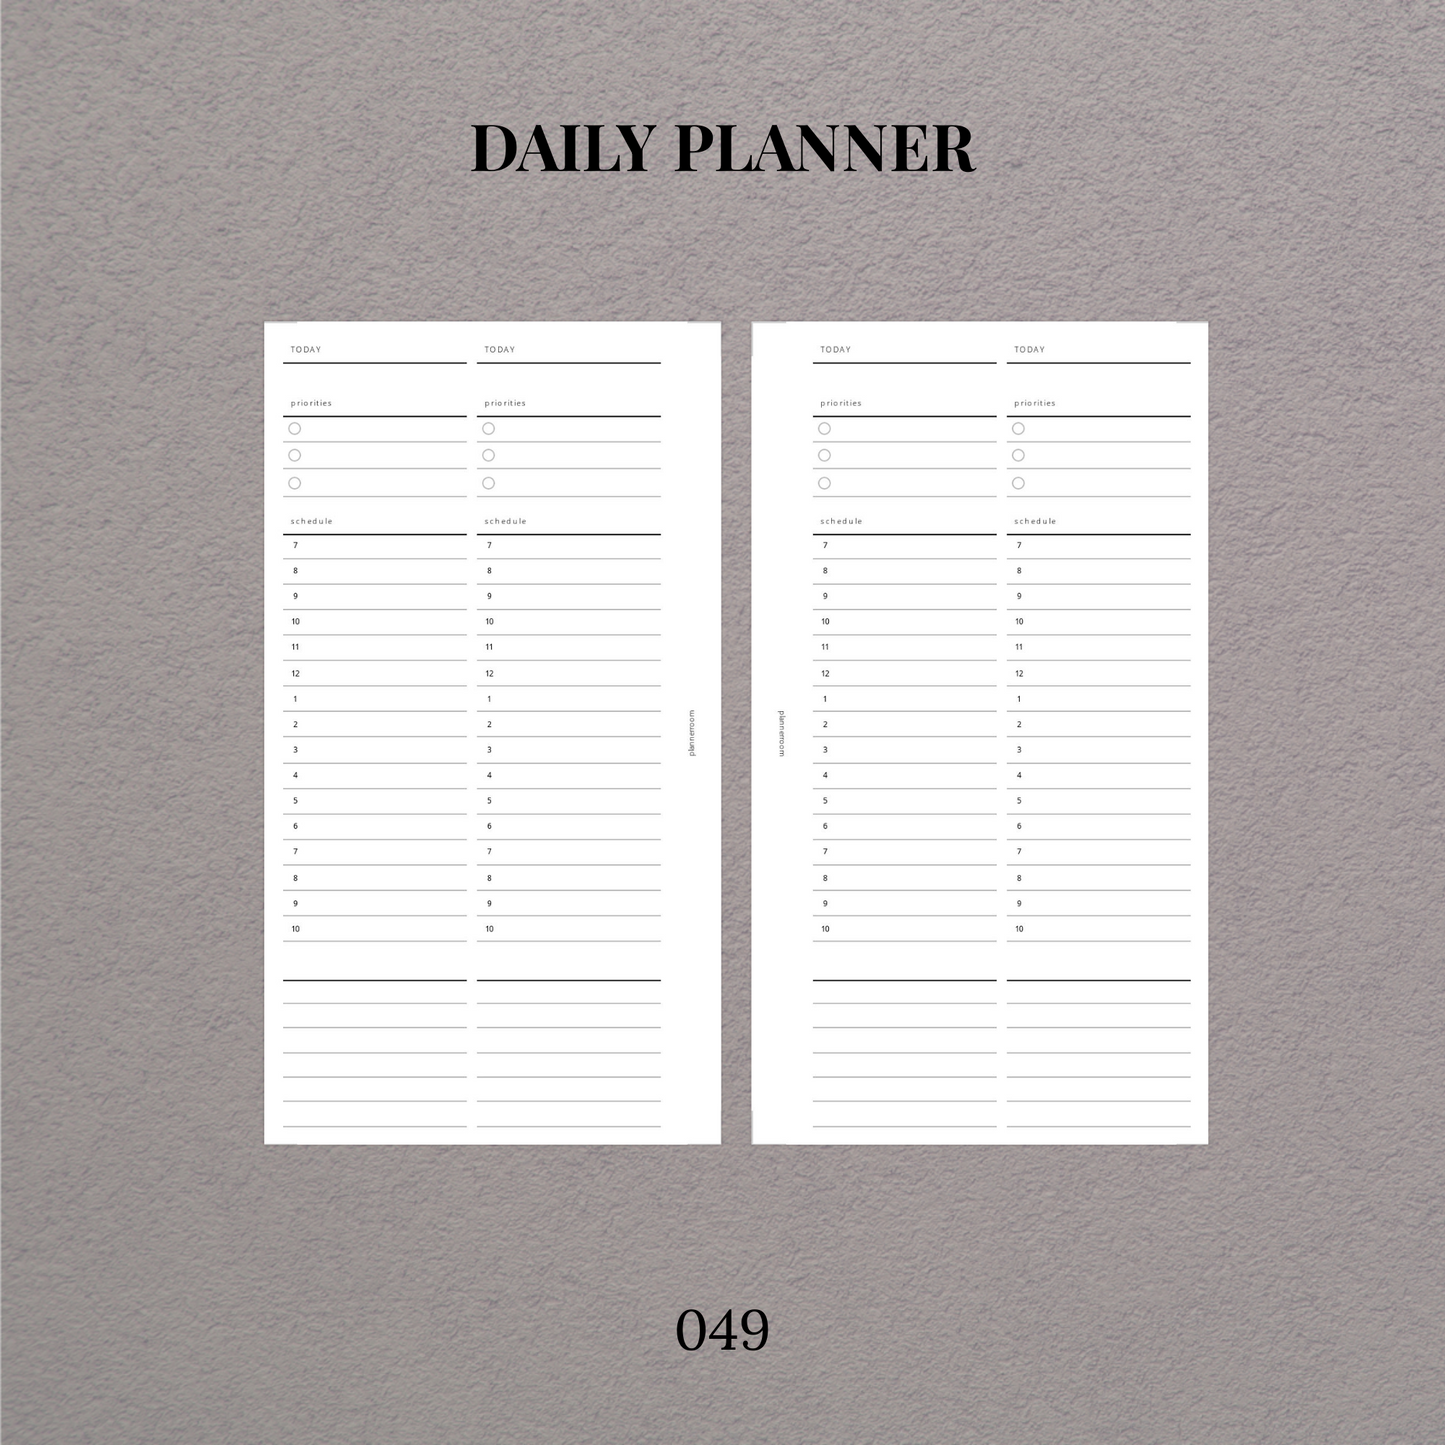 Daily planner | Printable inserts - 049